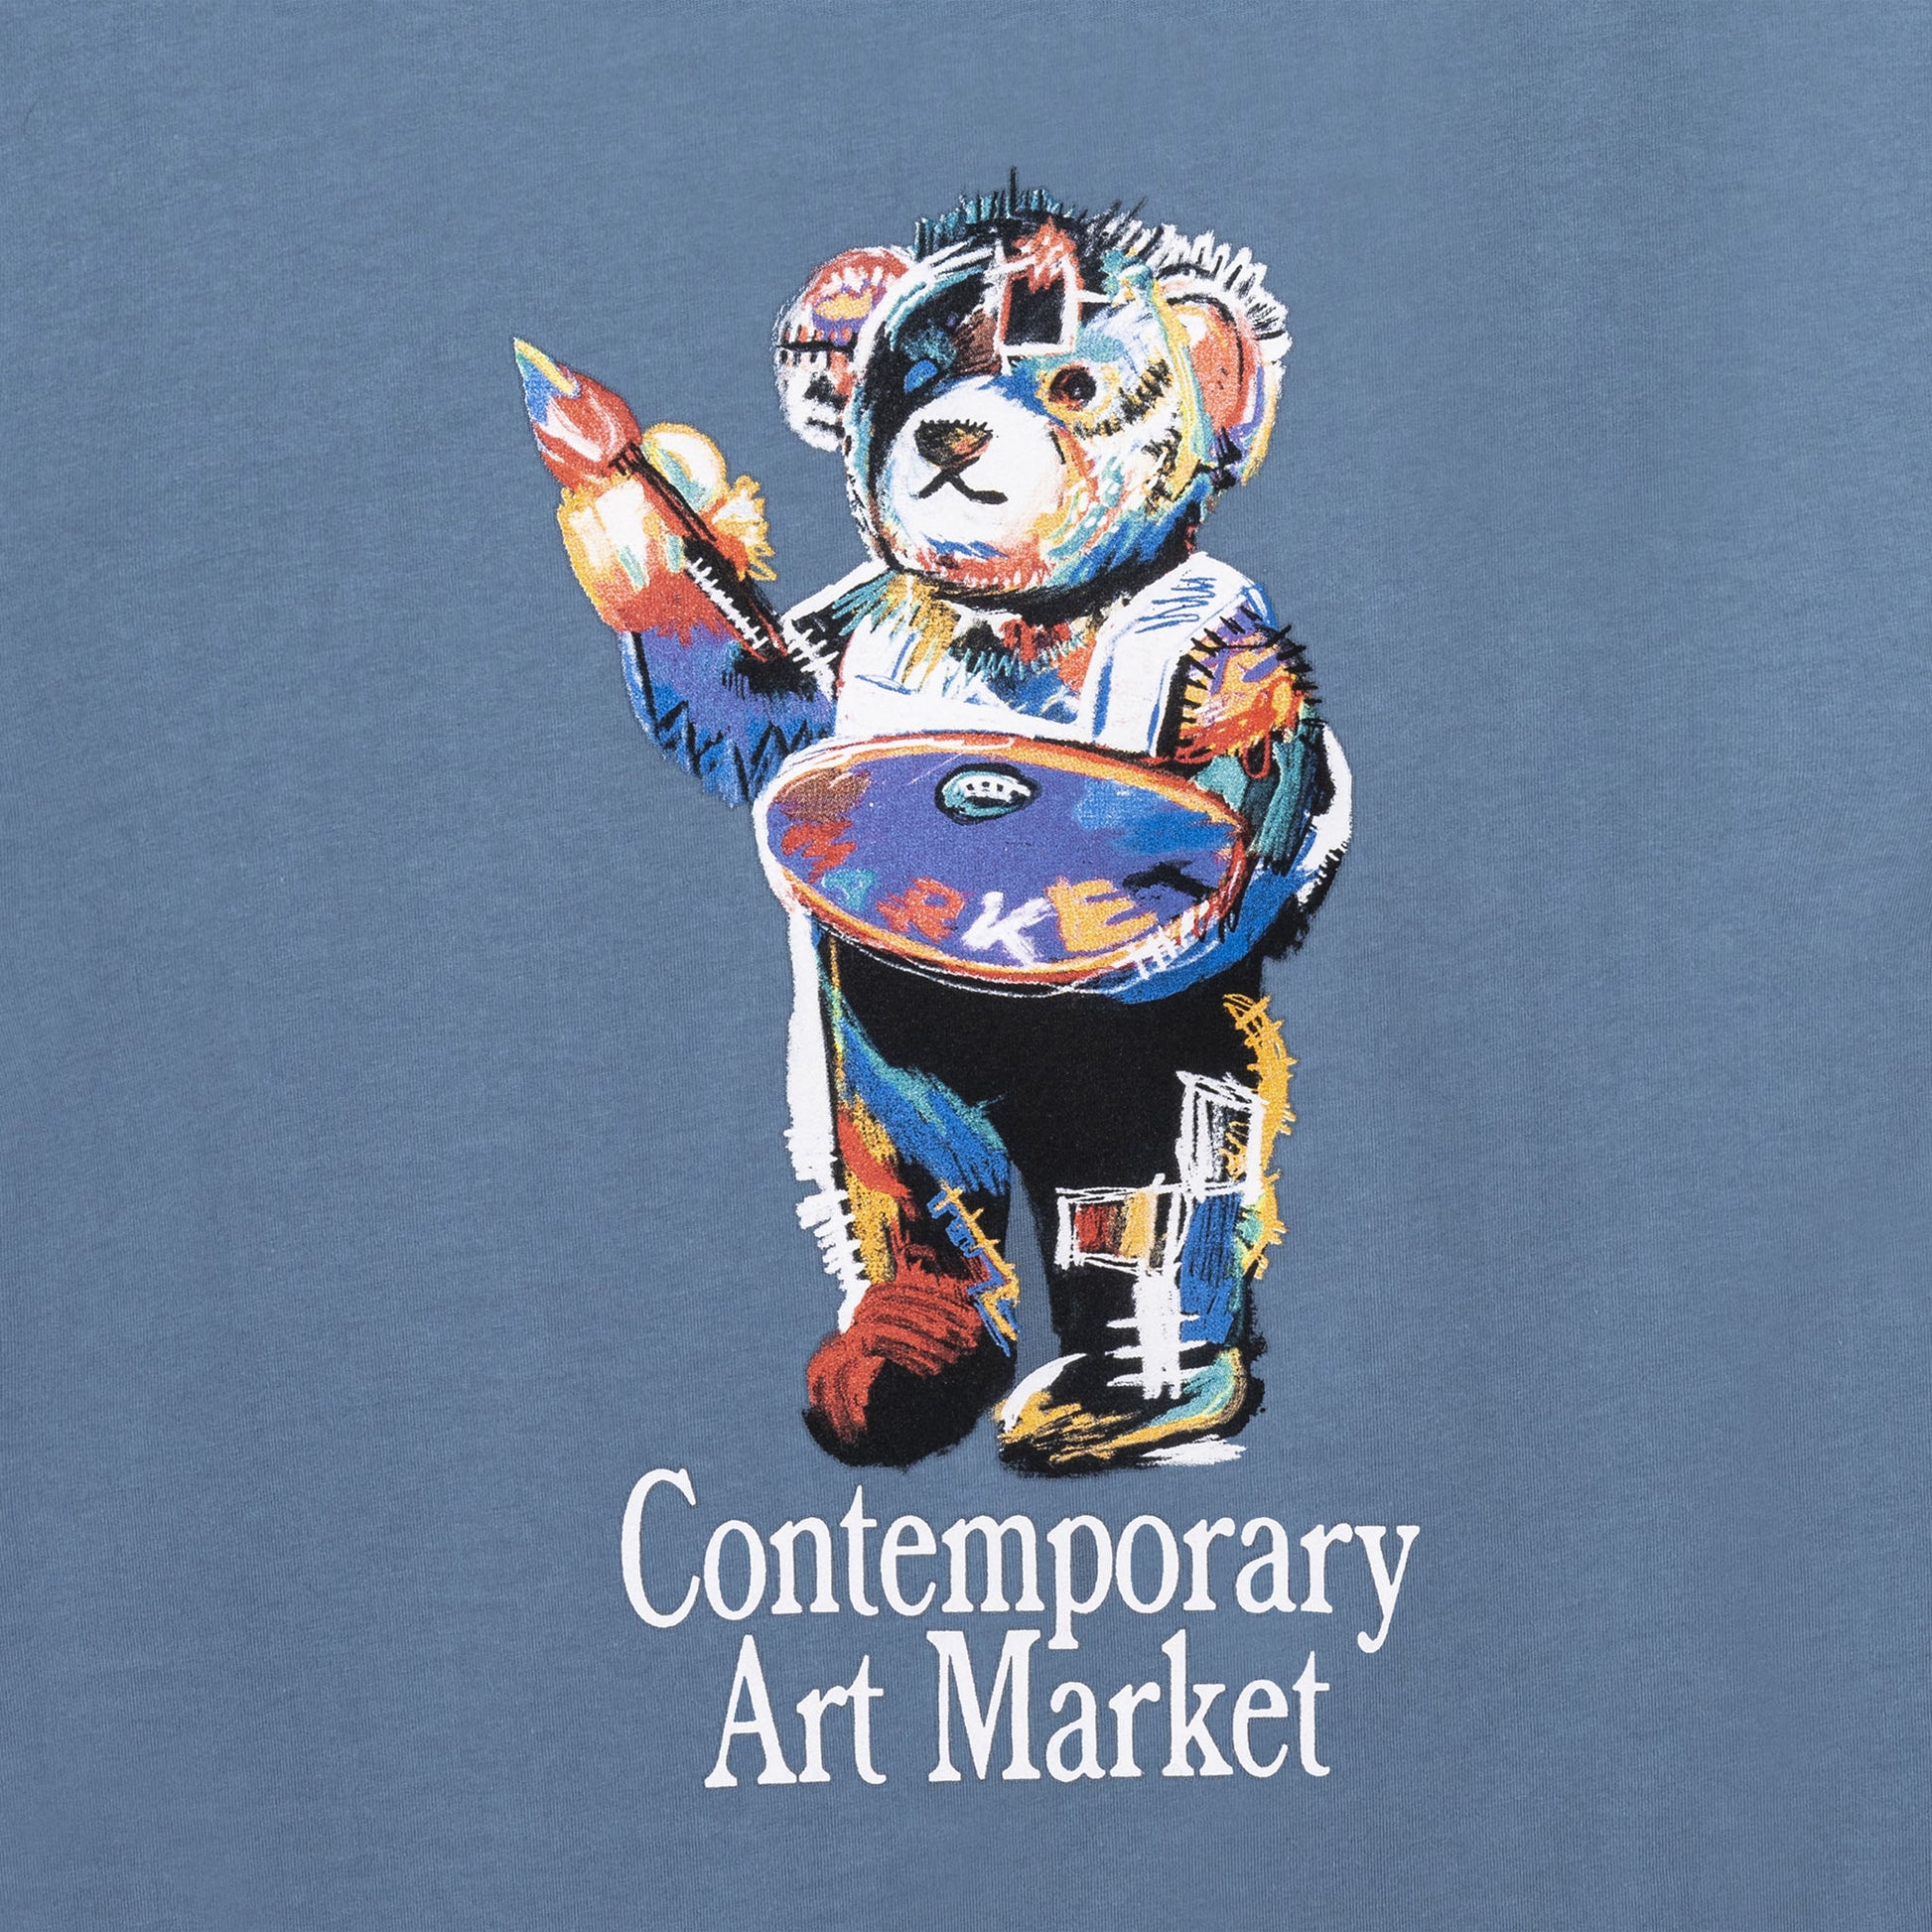 MARKET clothing brand ART MARKET BEAR T-SHIRT. Find more graphic tees, hats, hoodies and more at MarketStudios.com. Formally Chinatown Market.